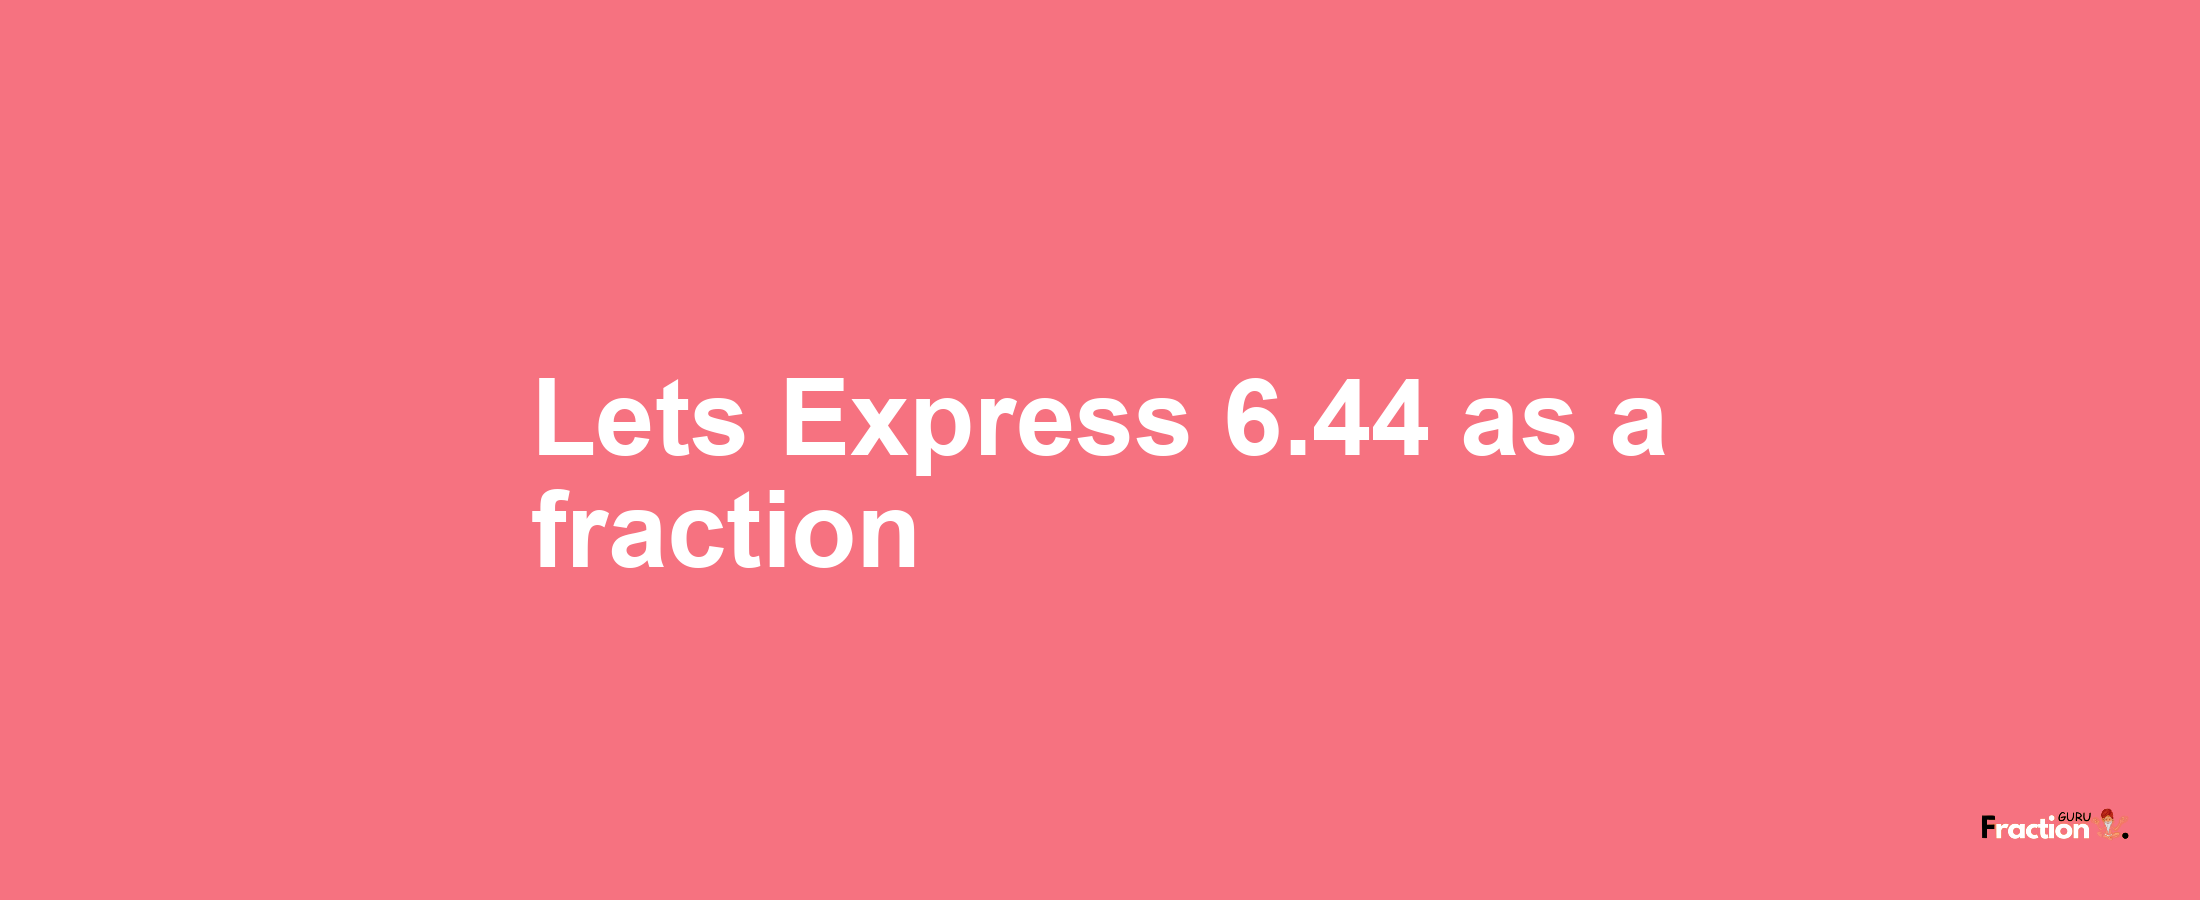 Lets Express 6.44 as afraction